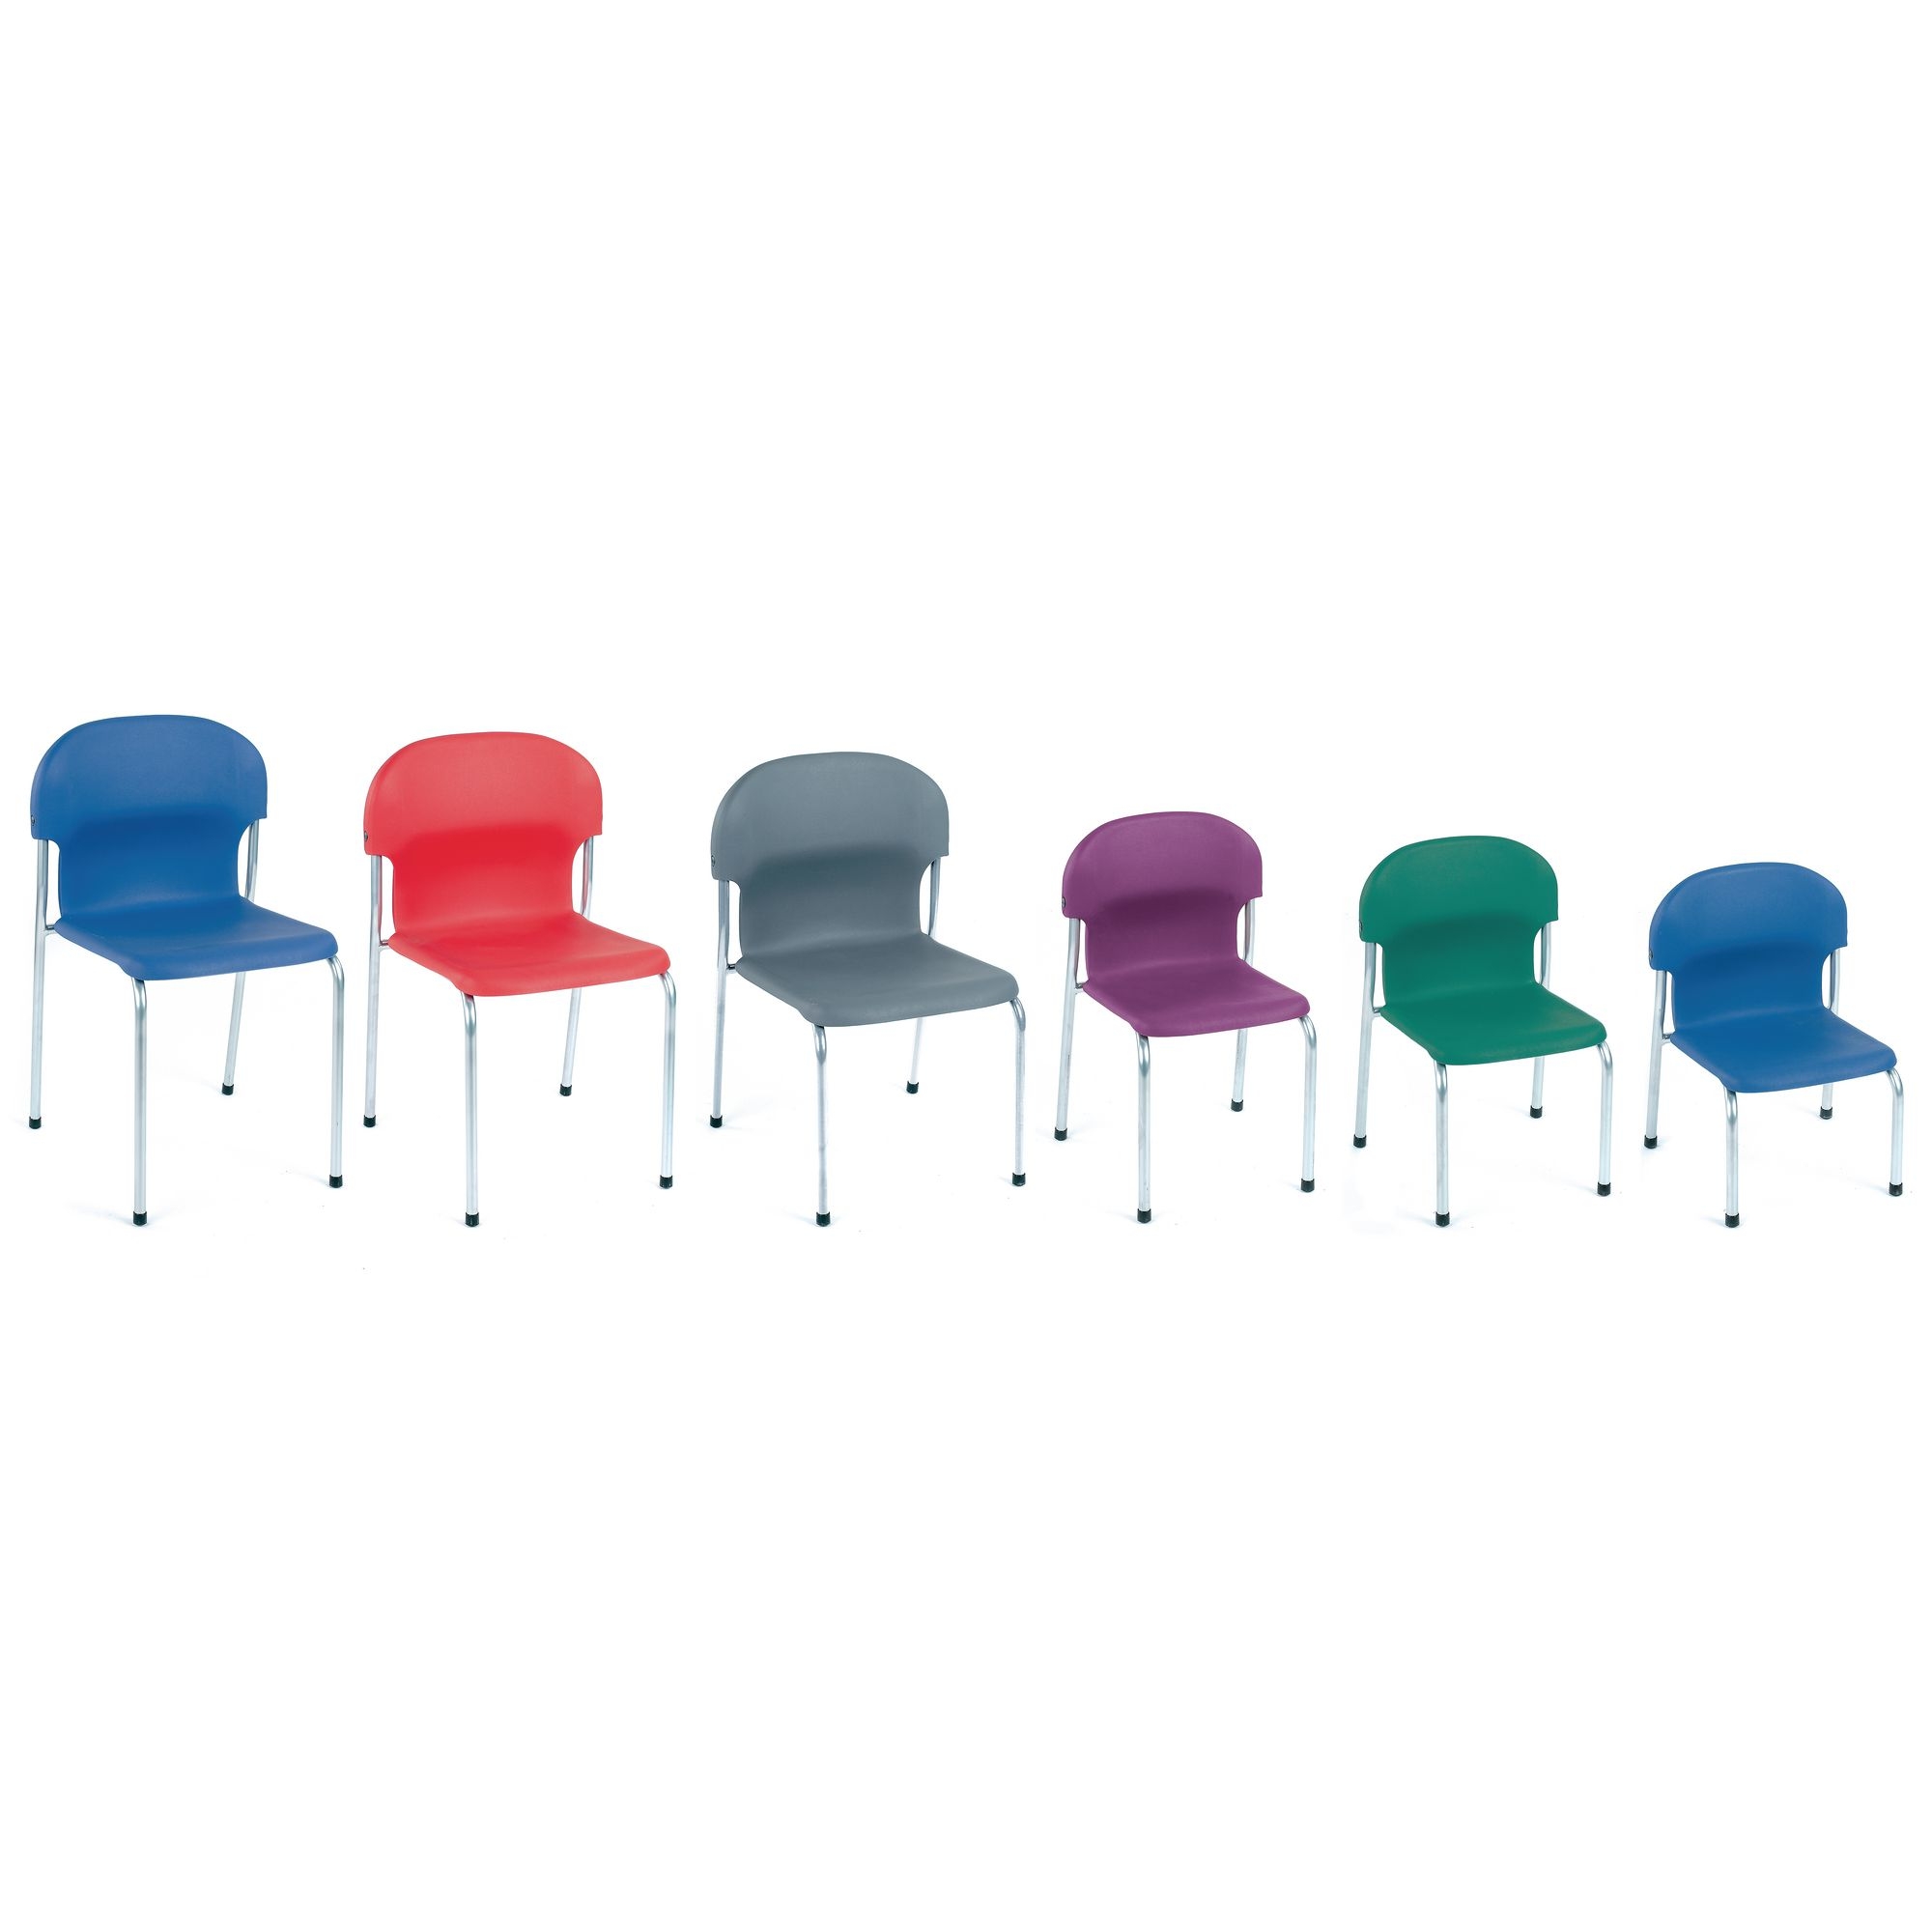 Chair 2000 - Size F - 460mm - Blue